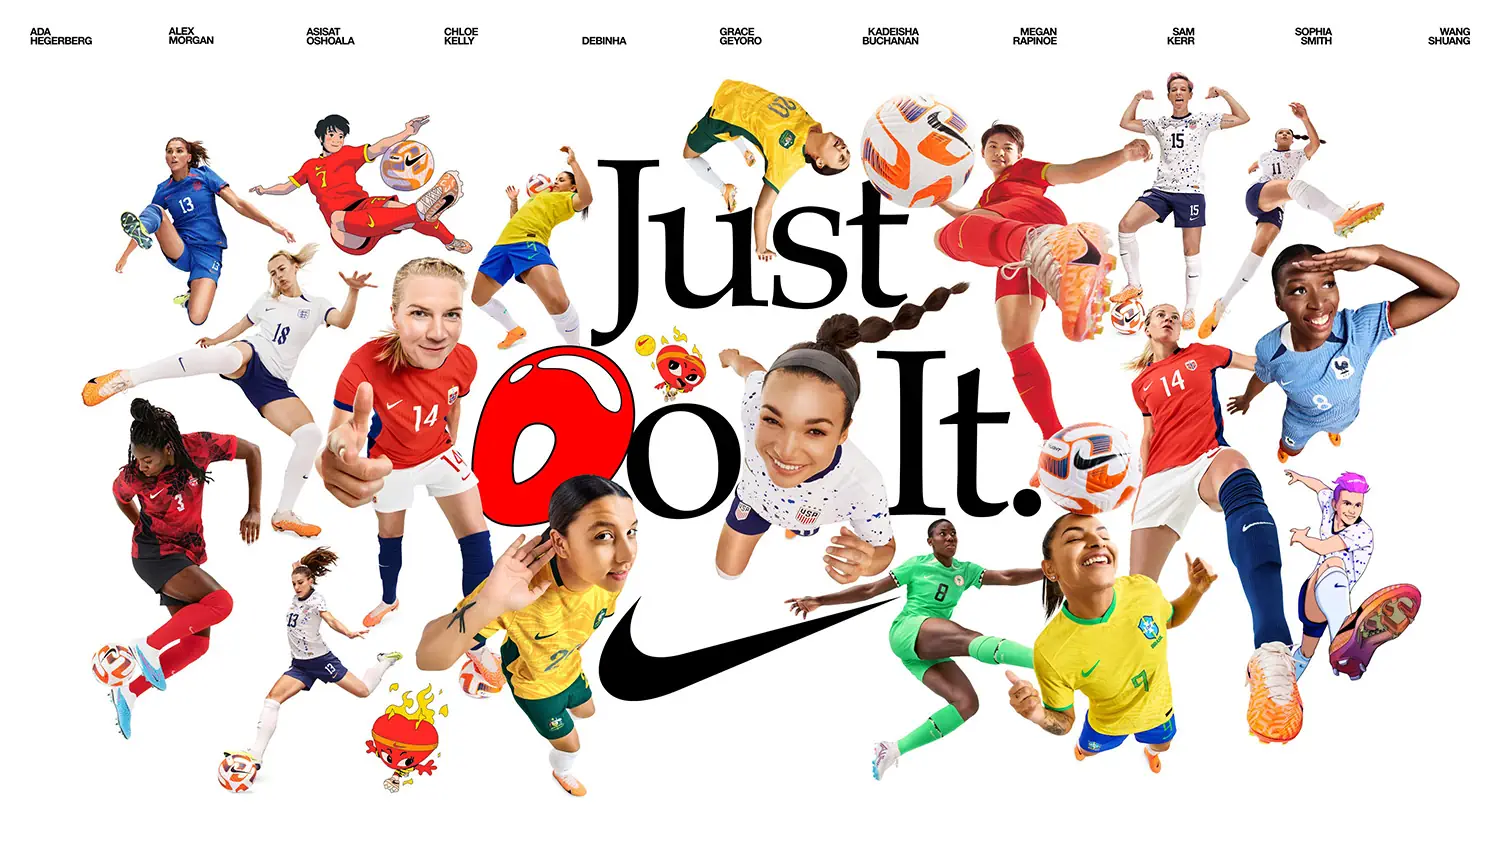 Nike “What The Football” campaign champions female athletes